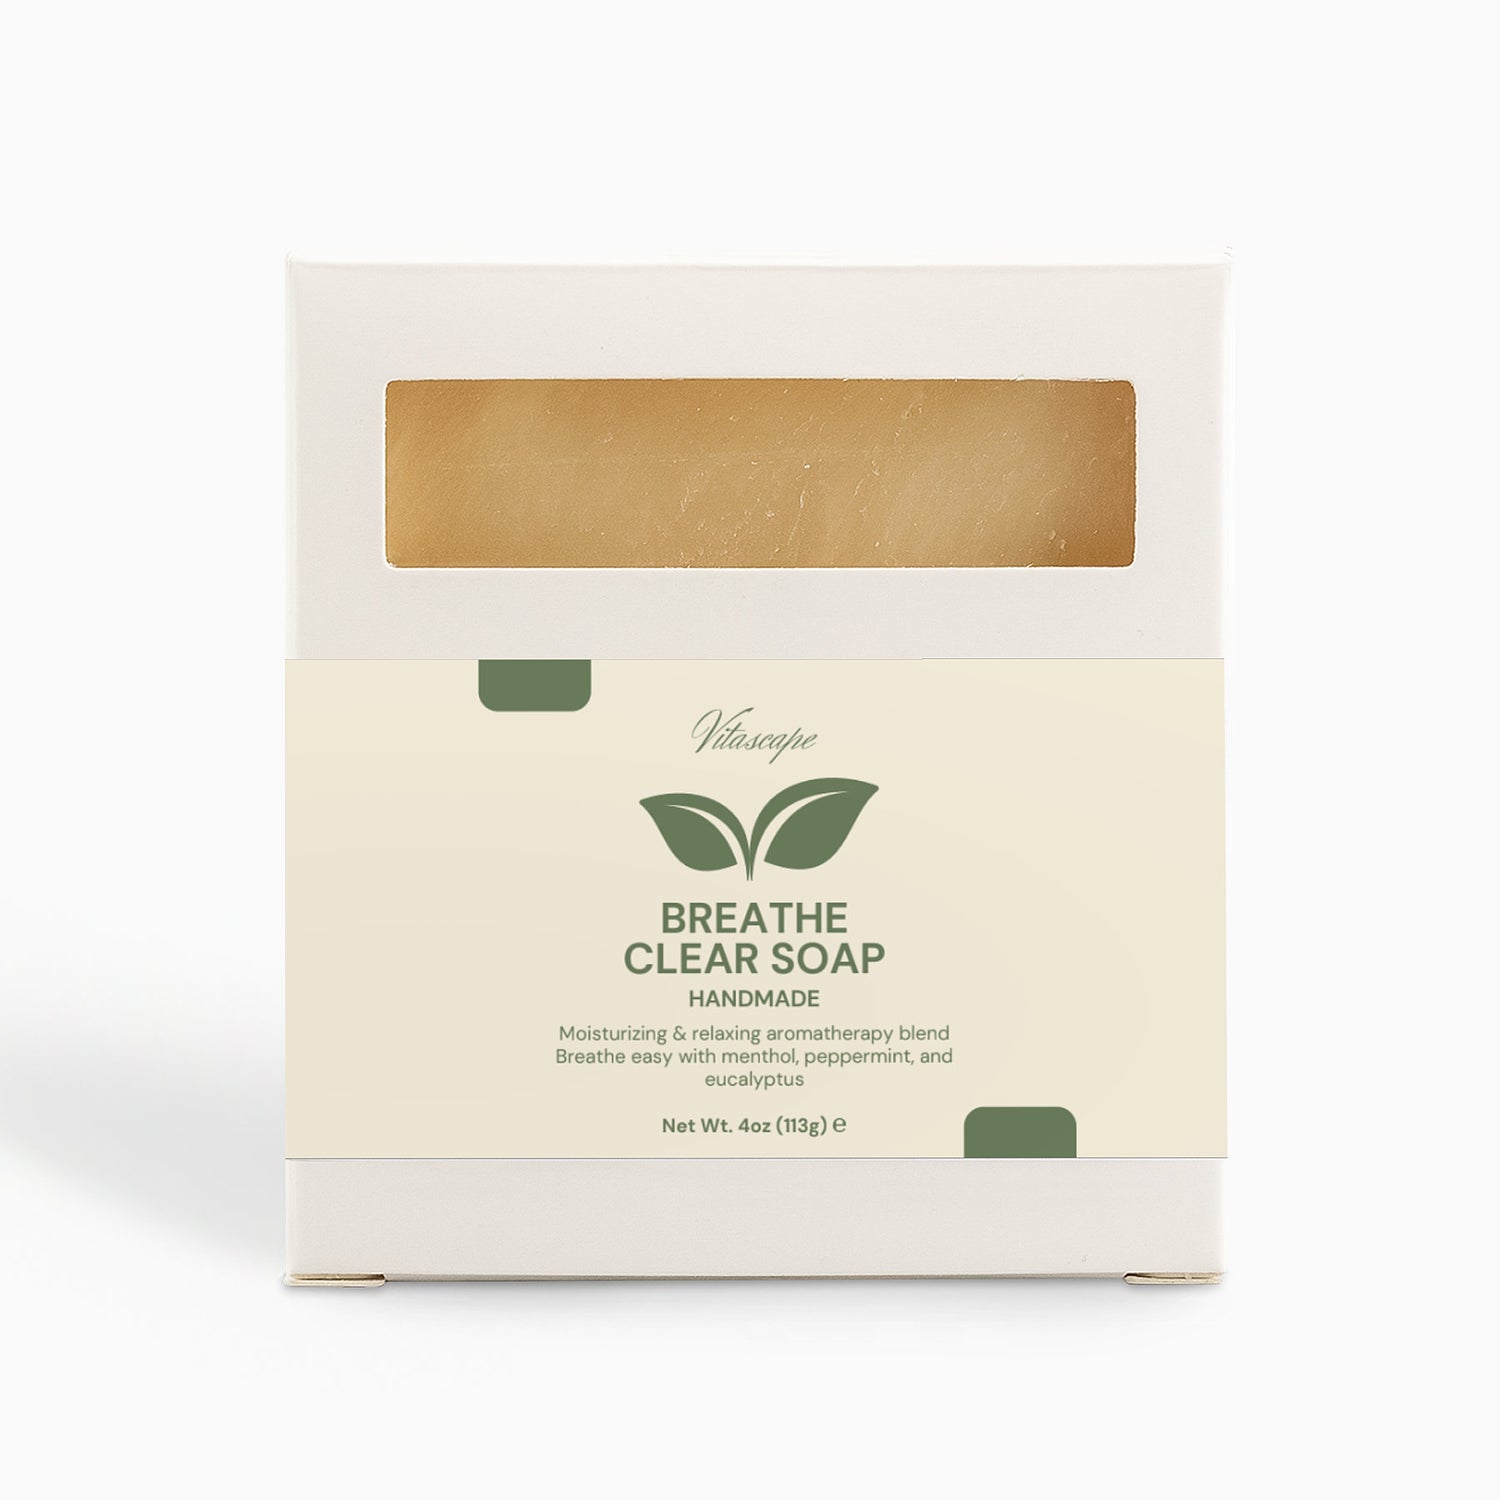 Vita-Scape's Breathe Clear Soap bar, visually capturing its natural, soothing essence. The soap is enriched with eucalyptus and other herbal ingredients, specifically designed to aid respiratory wellness and provide a refreshing, sinus-clearing experience. Ideal for those seeking a natural approach to clear breathing and a revitalizing body cleanse